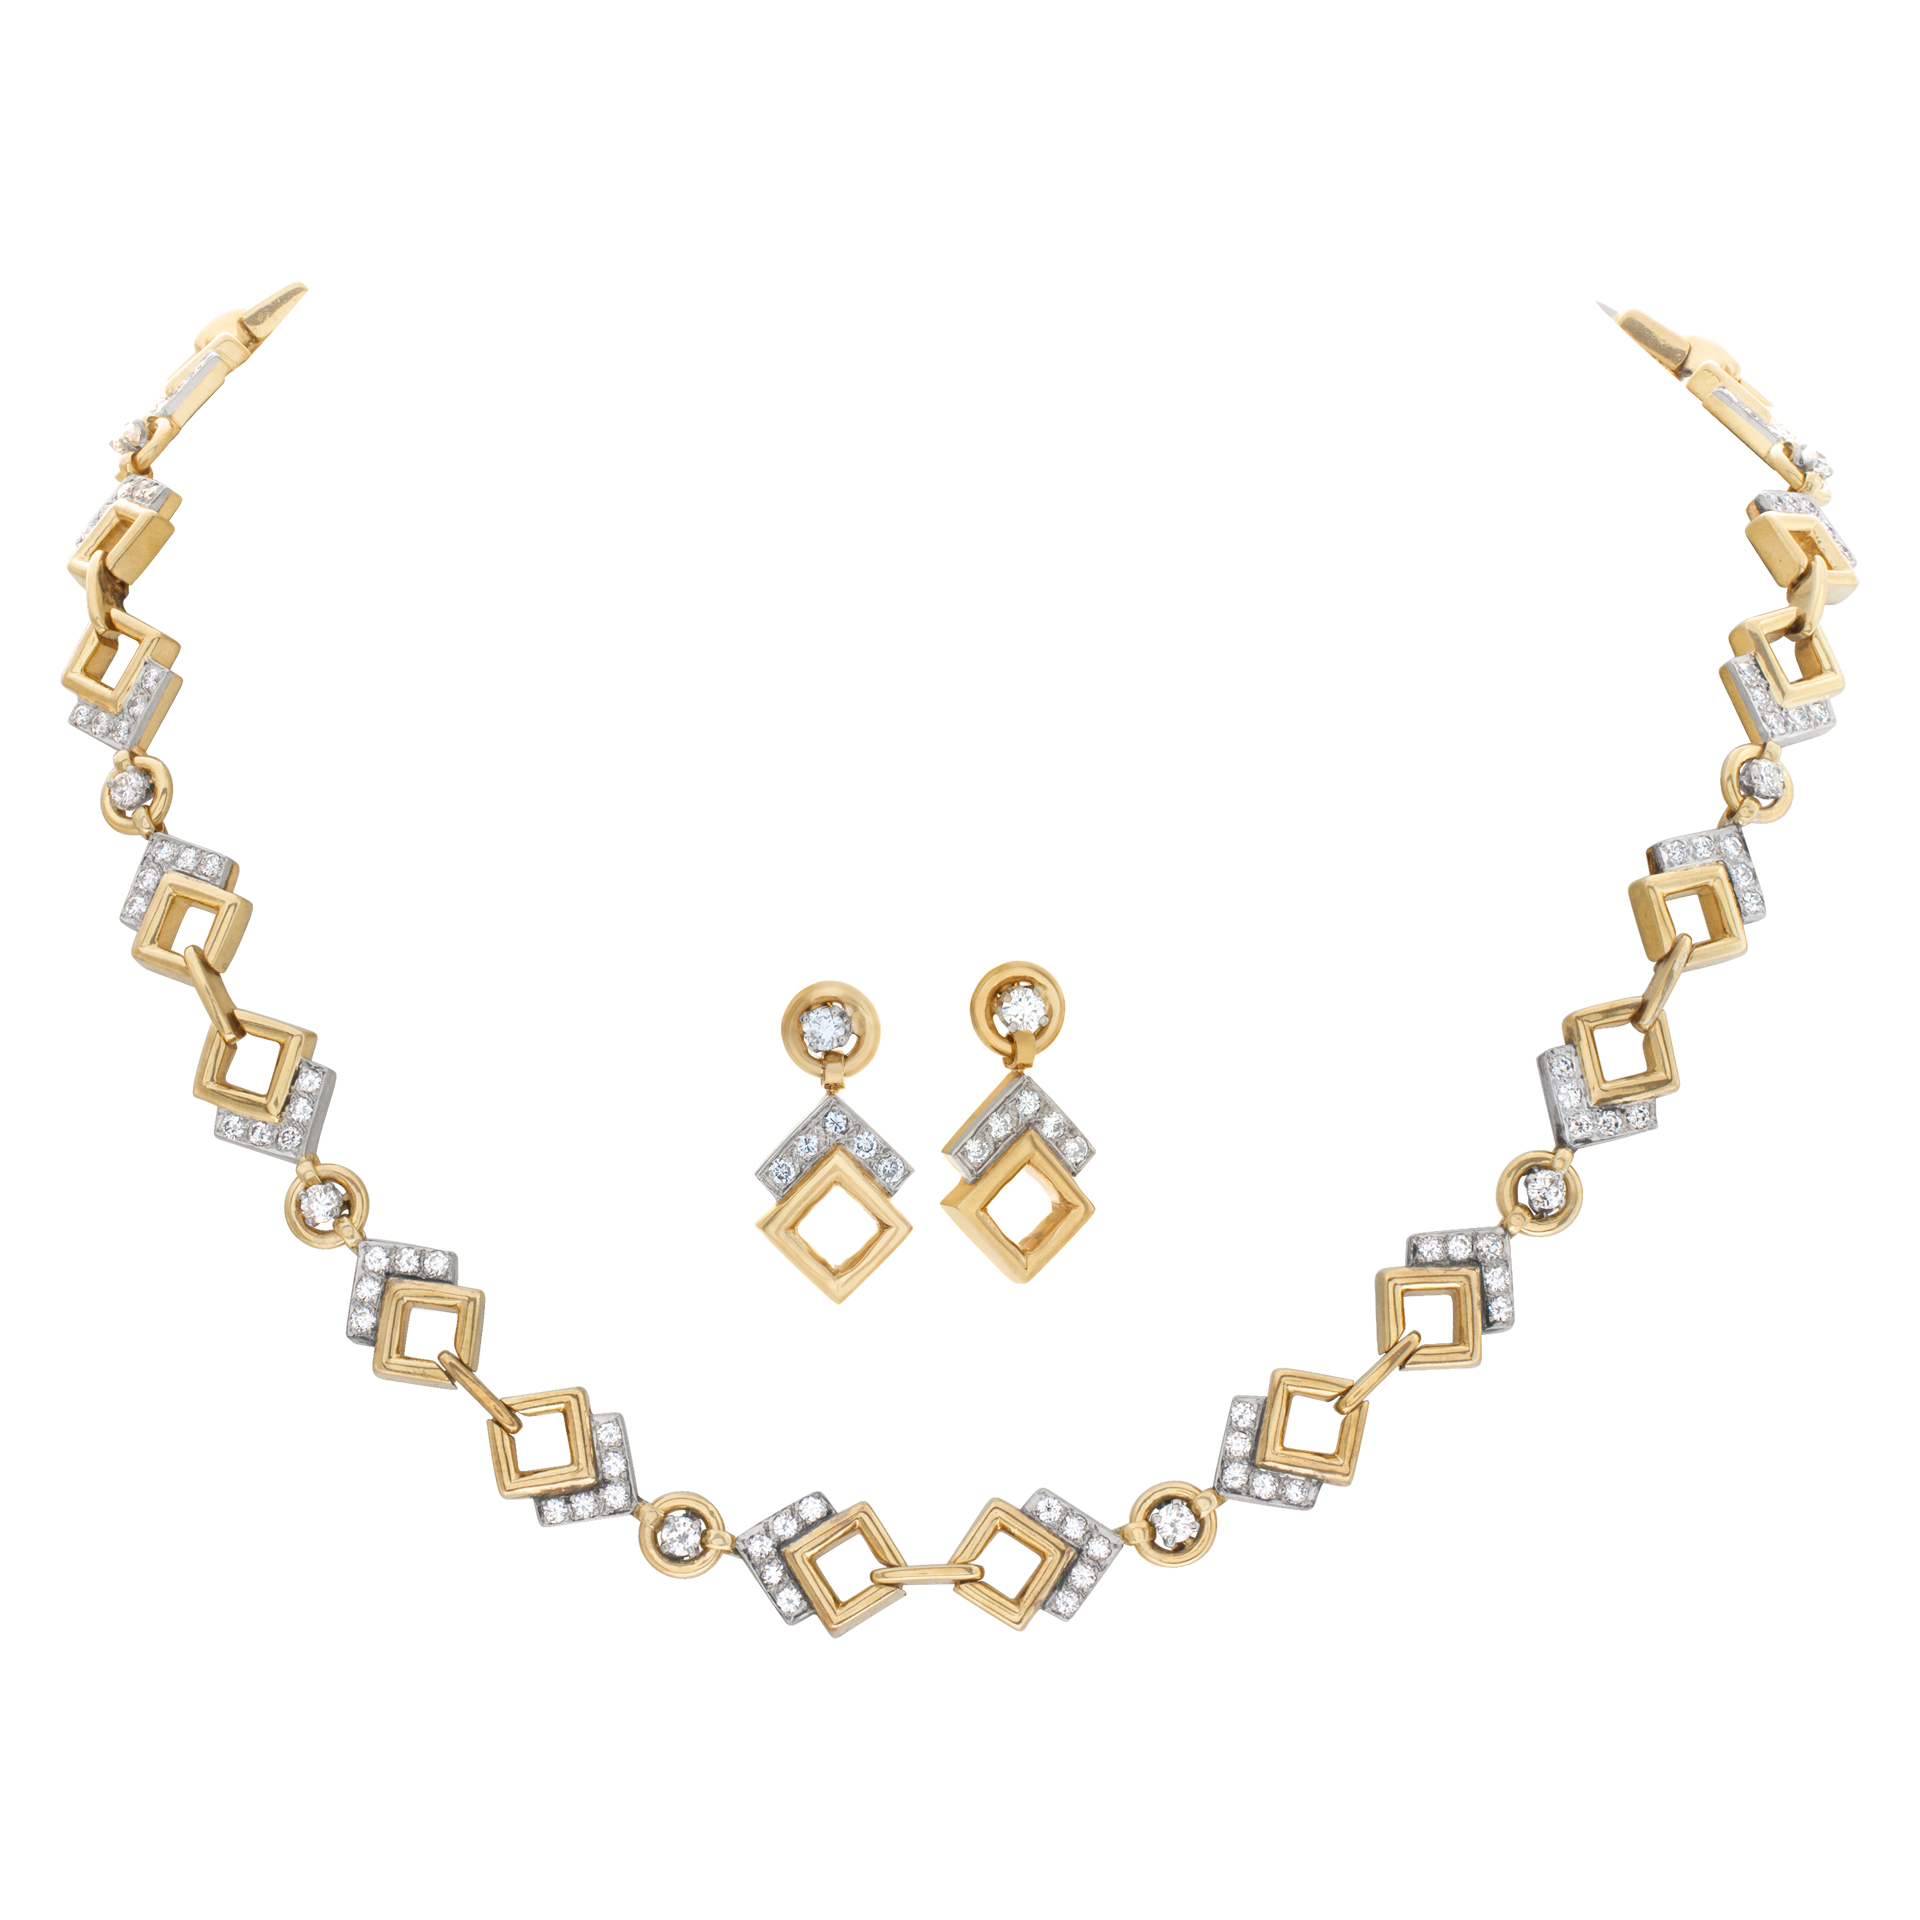 Geometric figures diamond necklace and earrings in 14k yellow and white gold